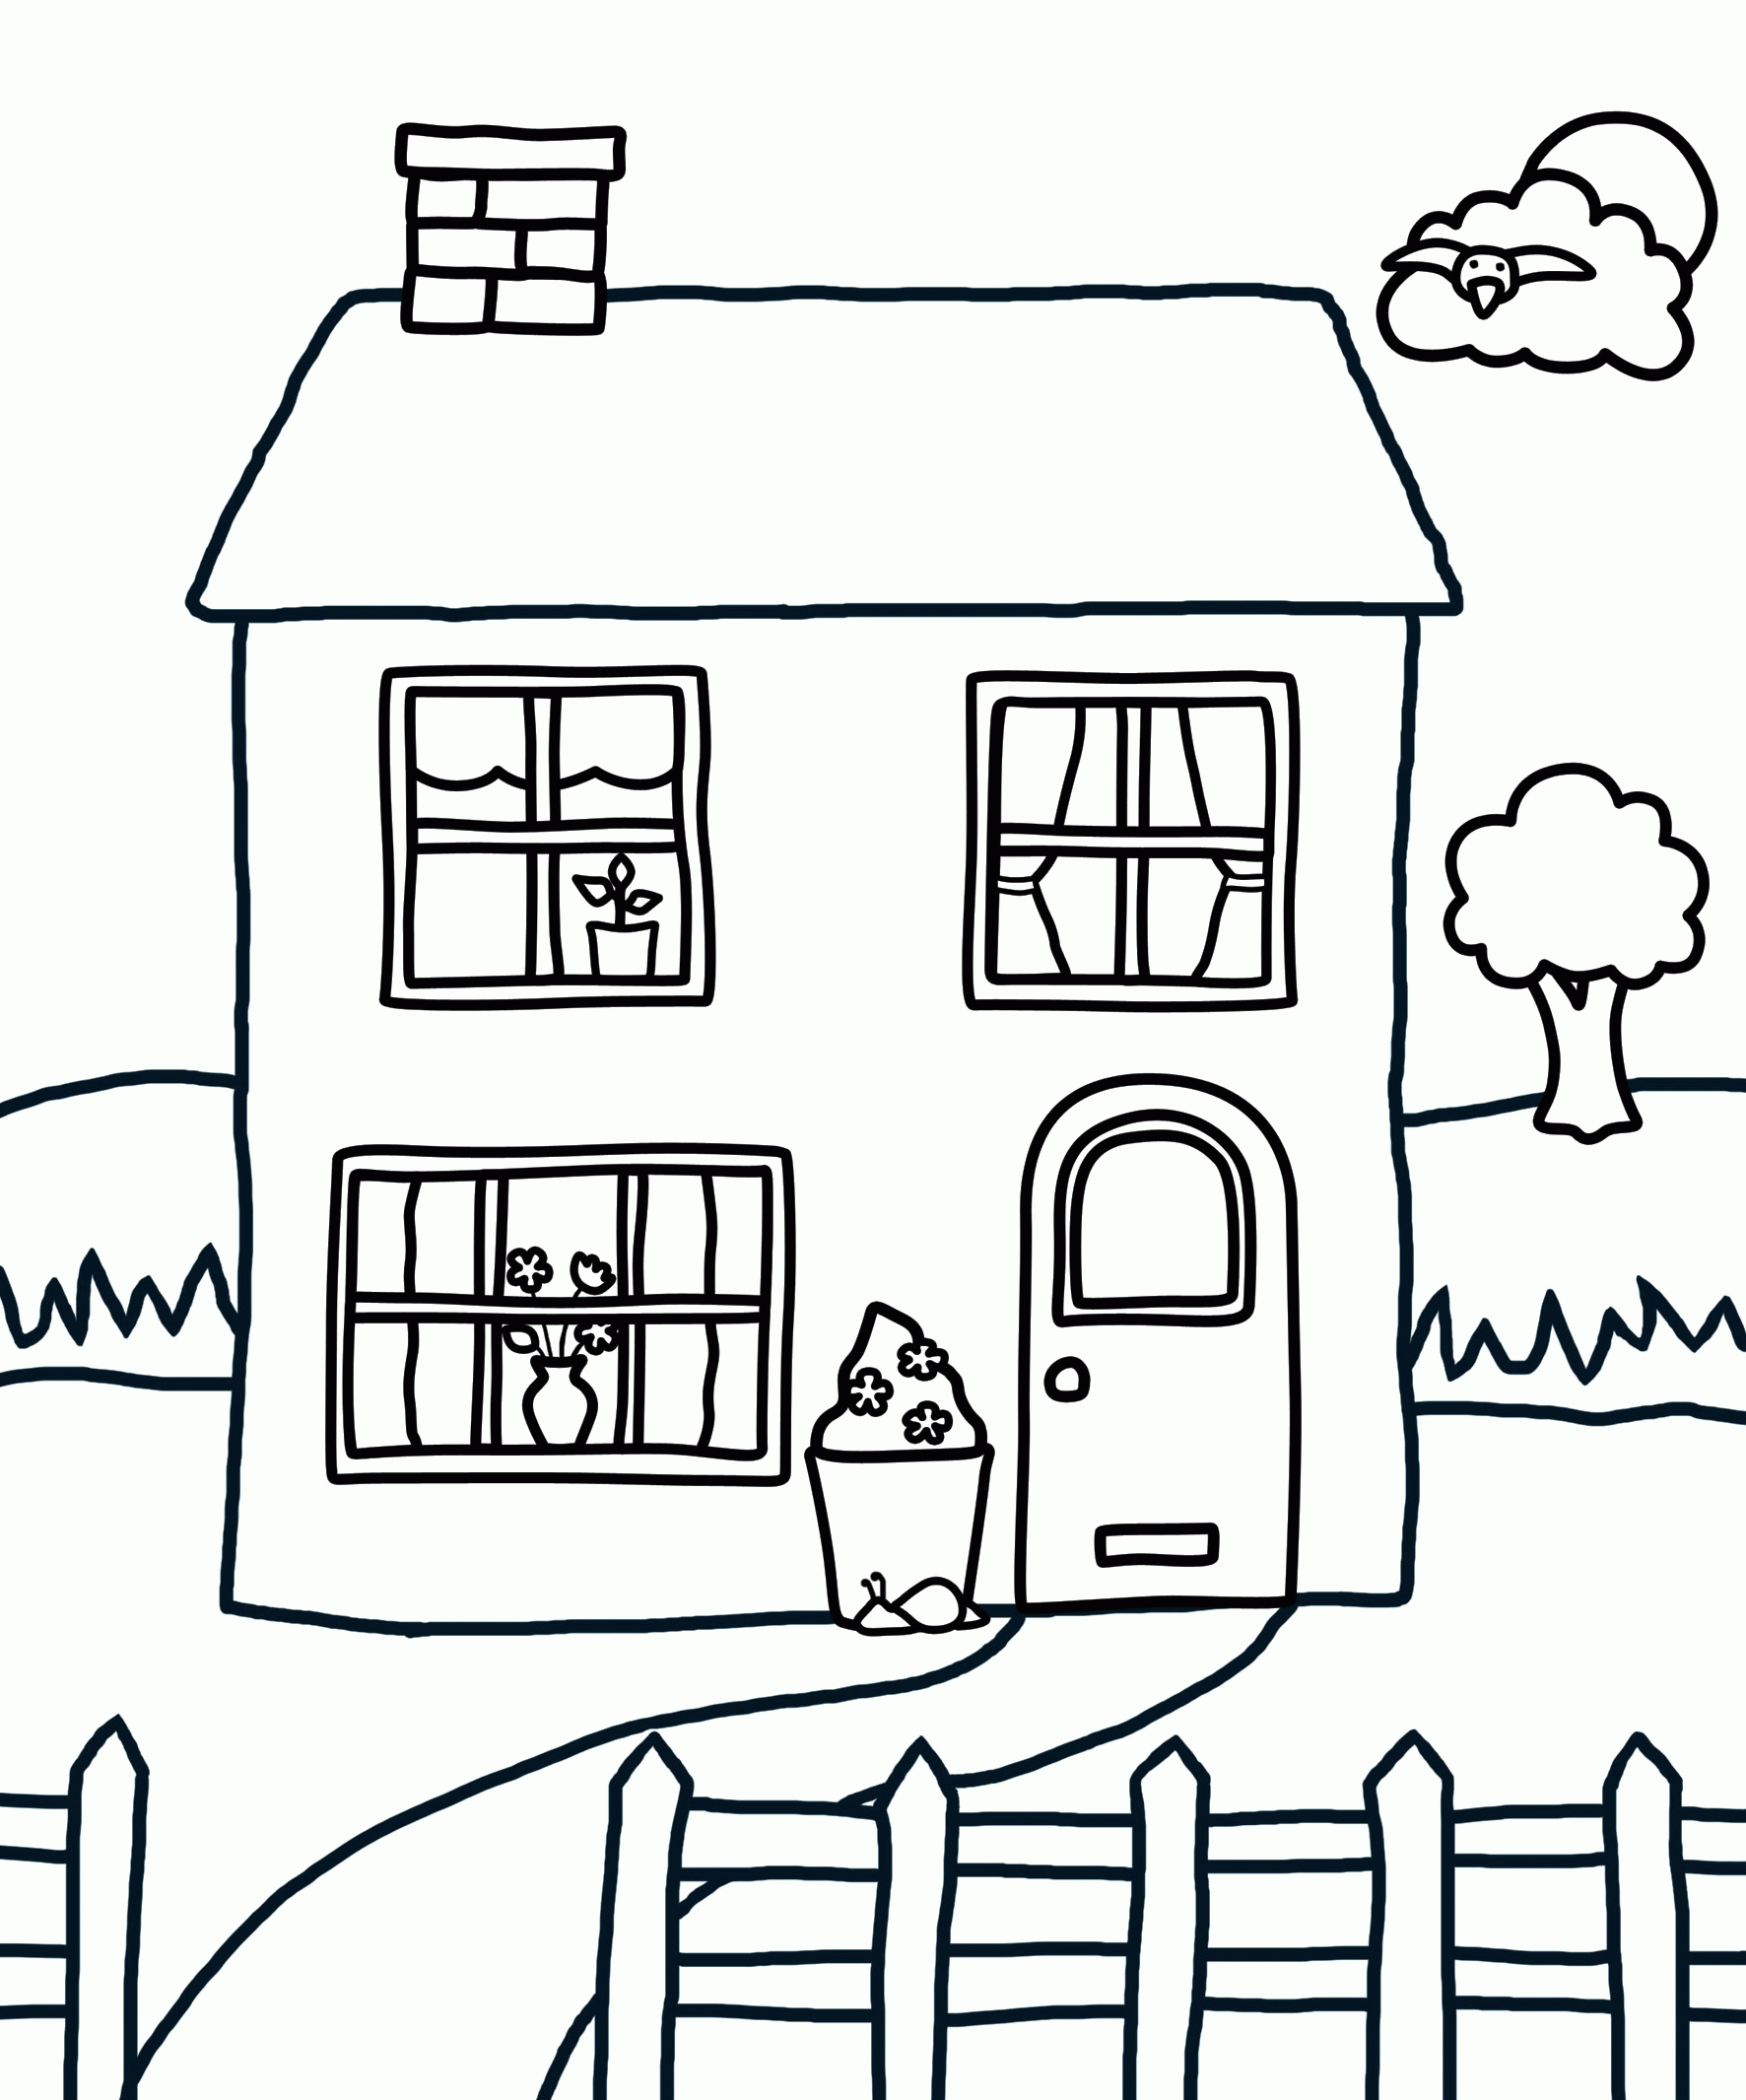 Free Full House Coloring Pages To Print, Download Free Full House ...